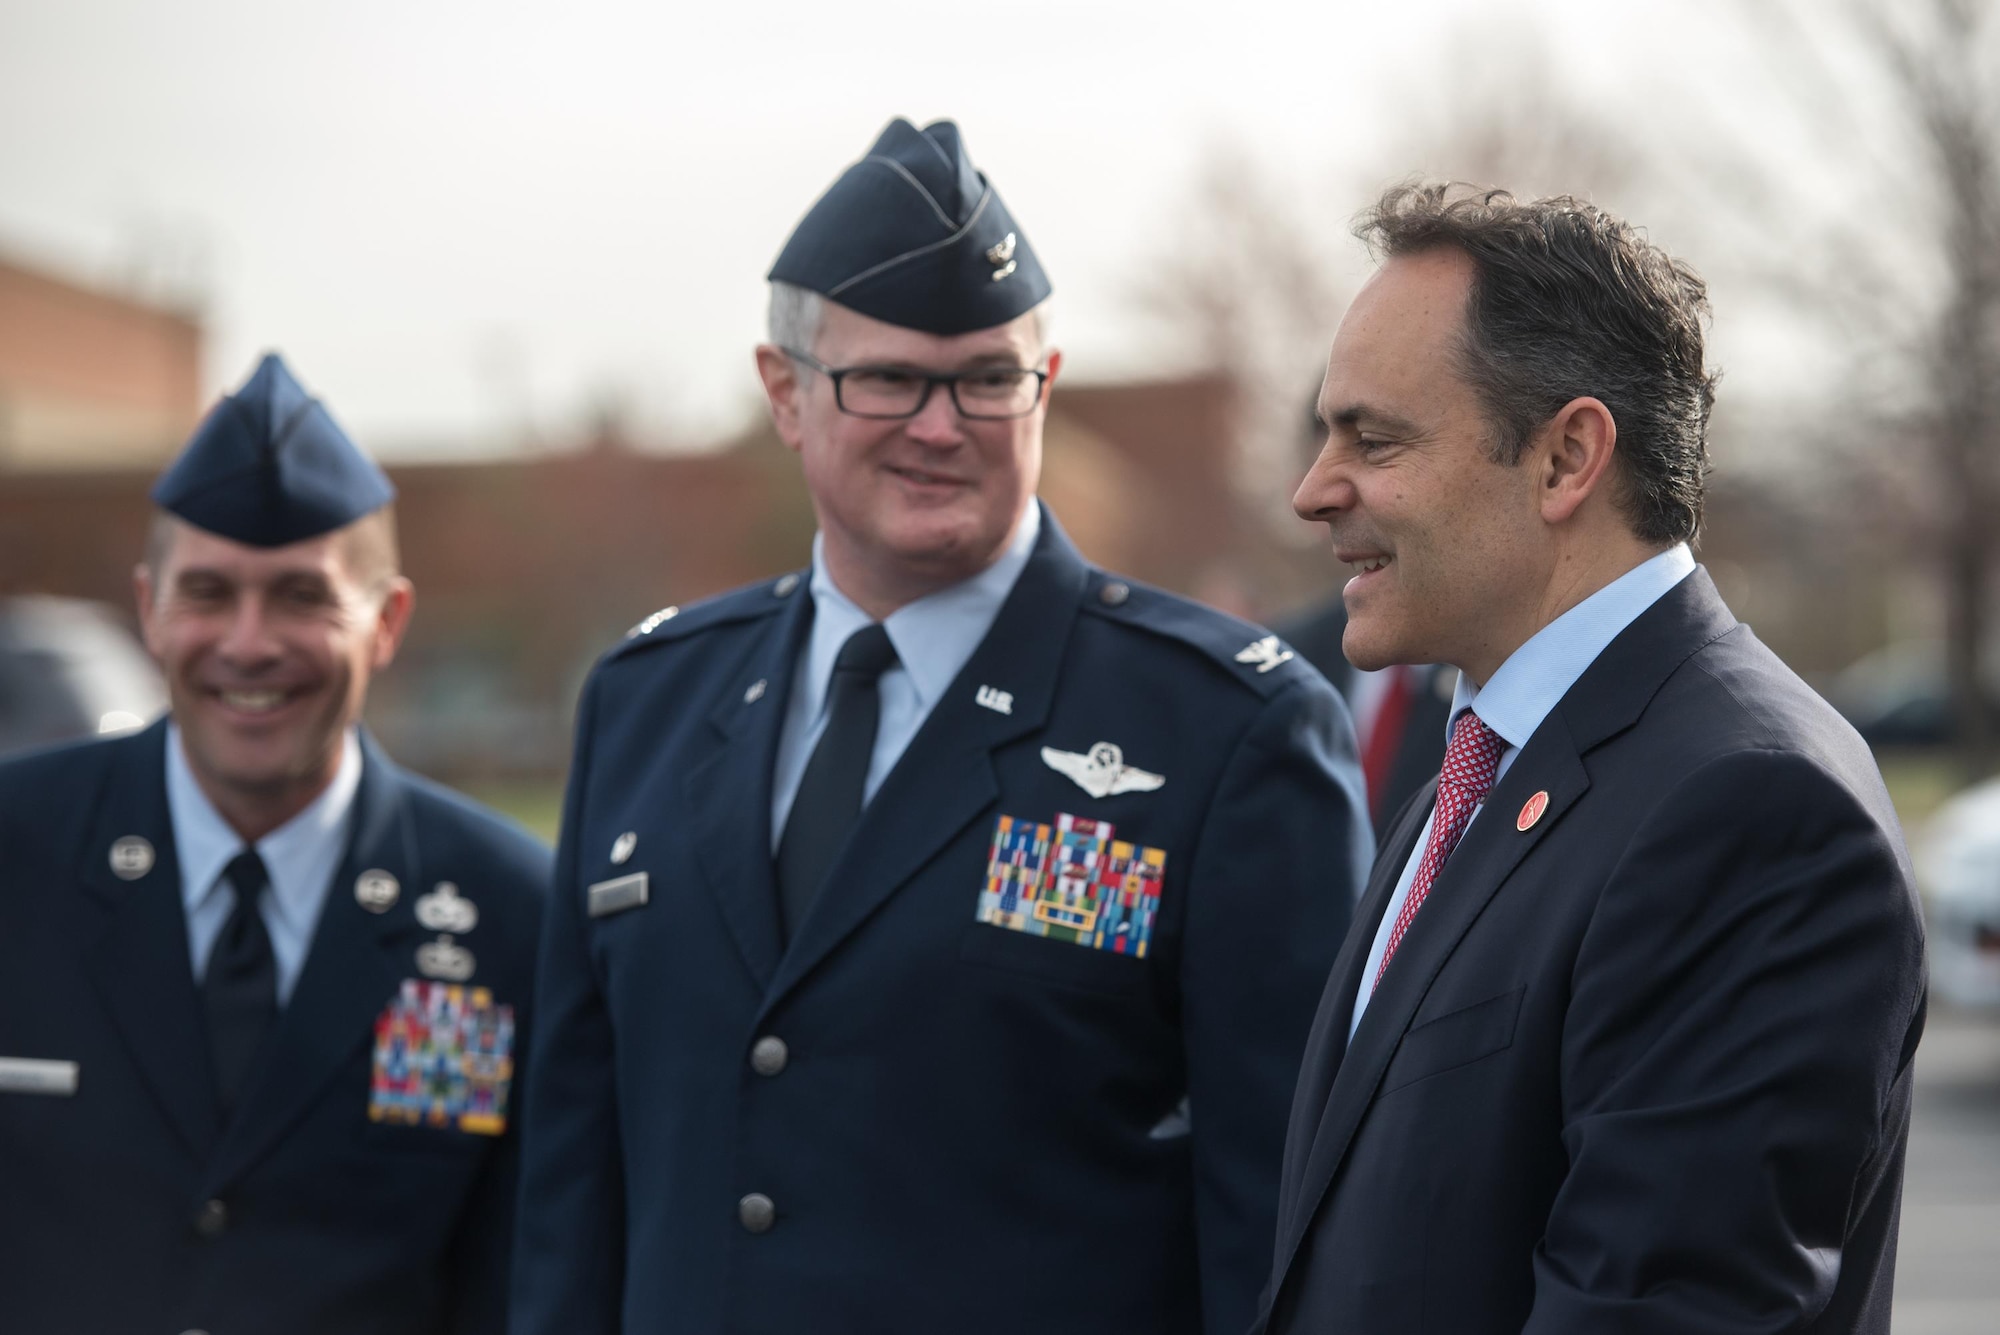 Kentucky Gov. Matt Bevin (right) talks with Col. David Mounkes, commander of the 123rd Airlift Wing, while they wait for Vice President Mike Pence to arrive at the Kentucky Air National Guard Base in Louisville, Ky., March 11, 2017. Pence was in Louisville to speak with local business leaders about health care and the economy. (U.S. Air National Guard photo by Staff Sgt. Joshua Horton)